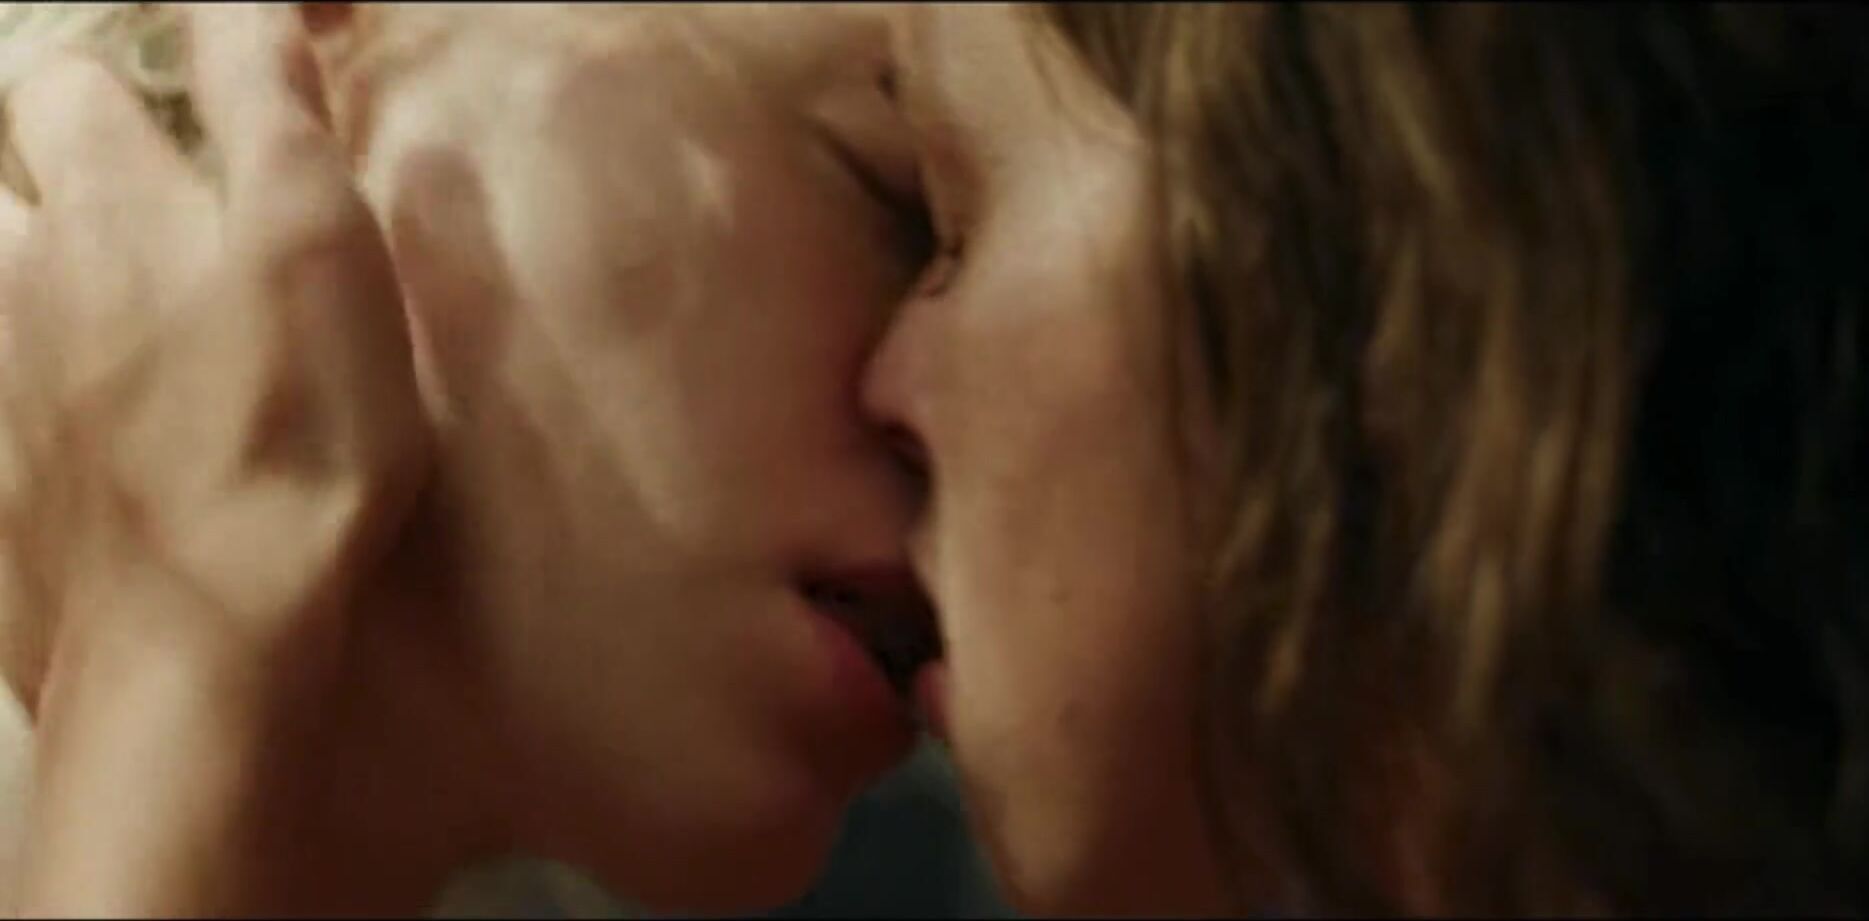 Cam Sex Below her Mouth contains carnal adventure moment of Erika Linder and her girlfriend Story